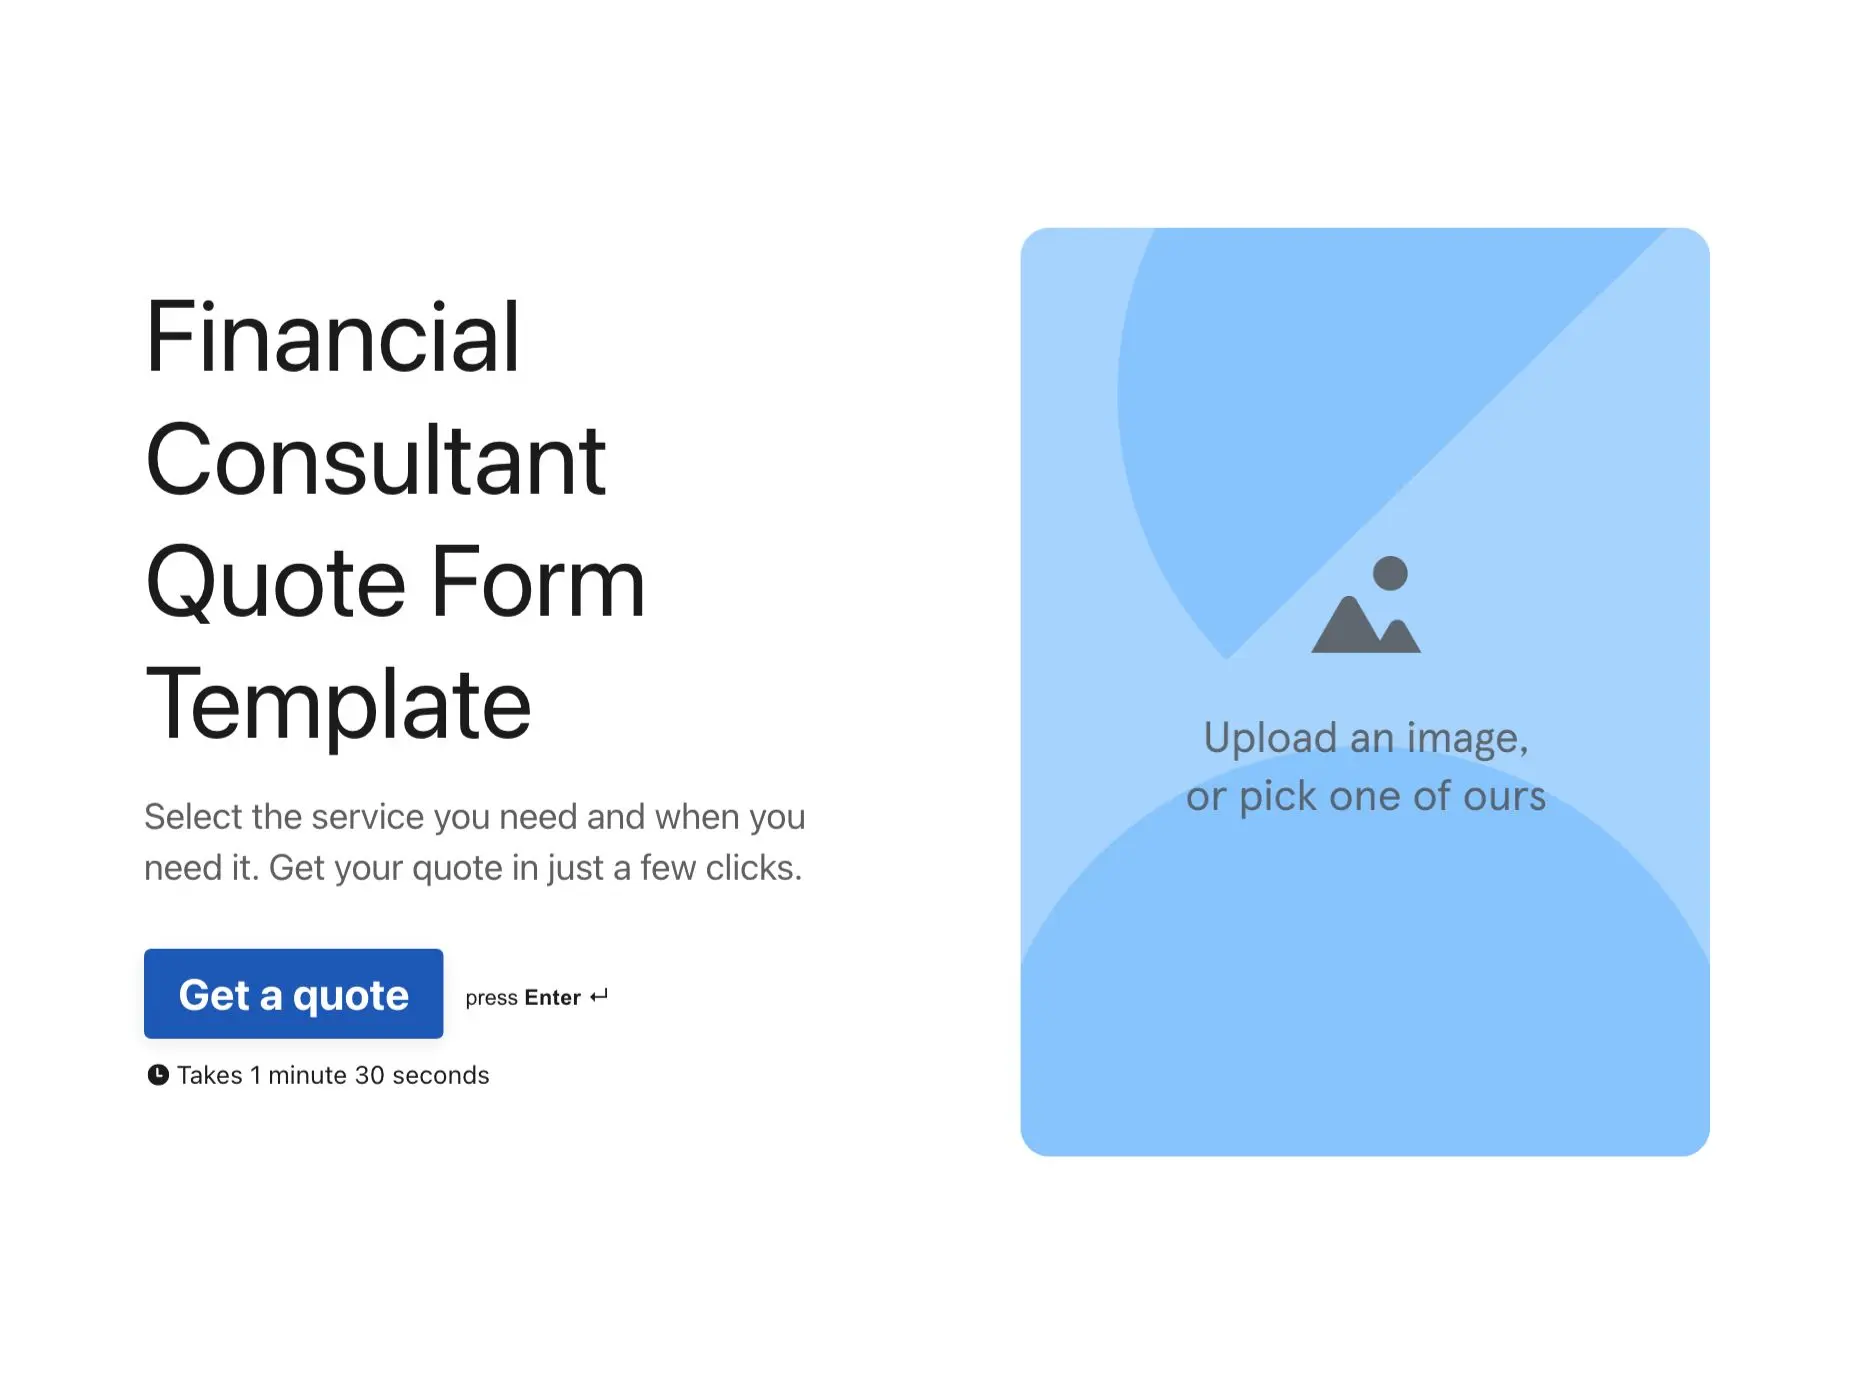 Financial Consultant Quote Form Template Hero